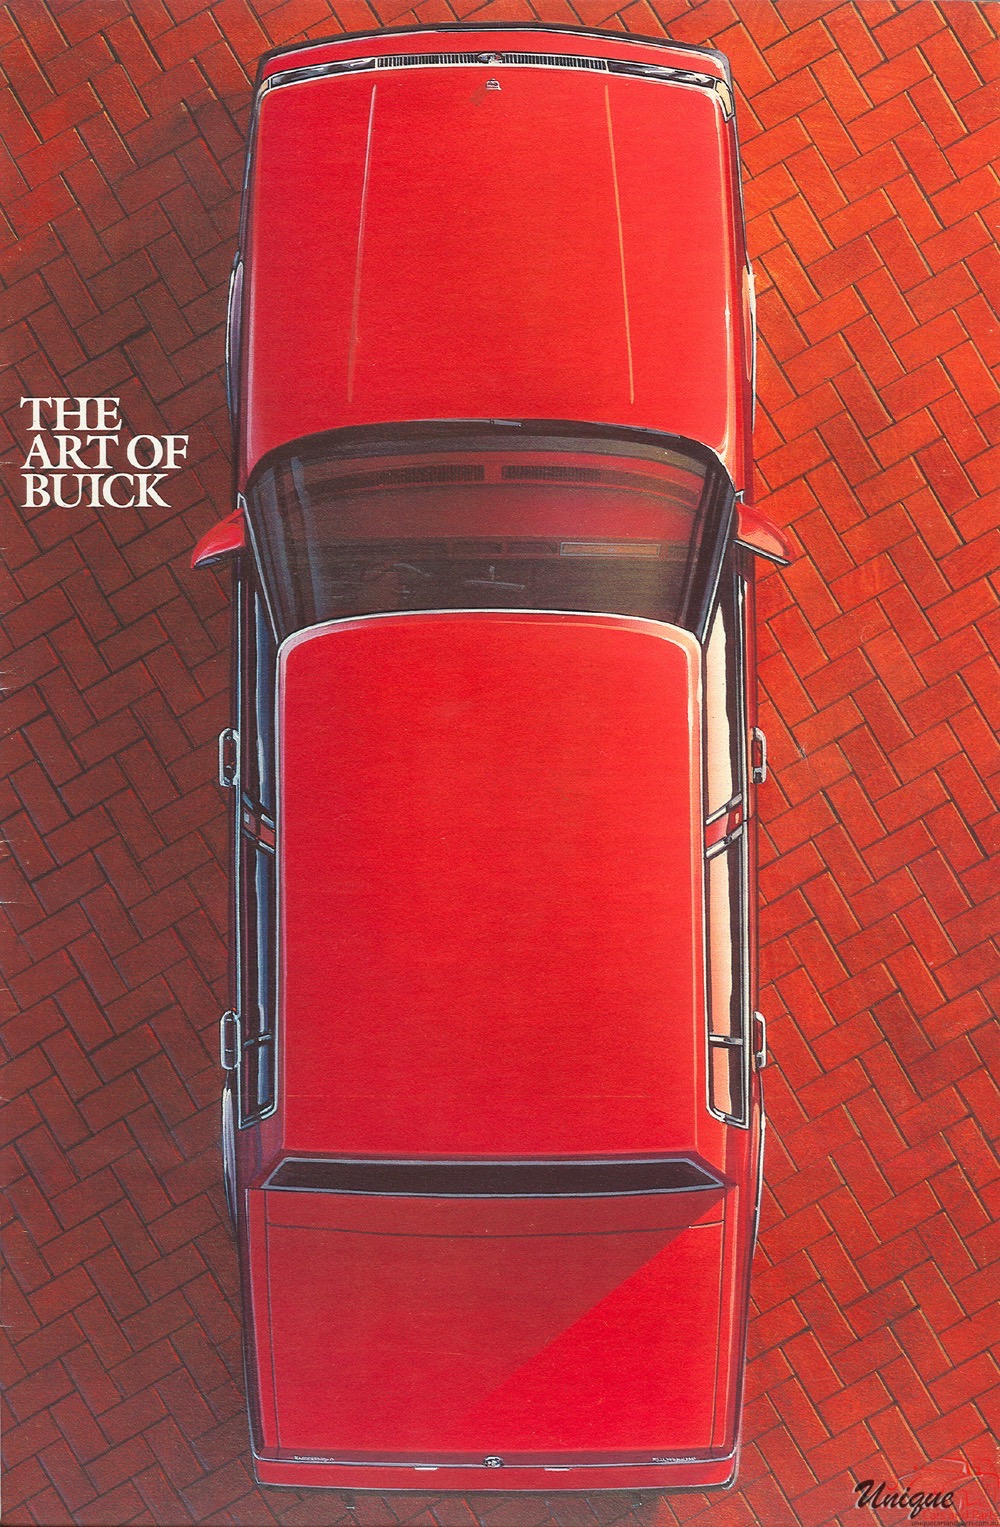 1985 - The Art of Buick